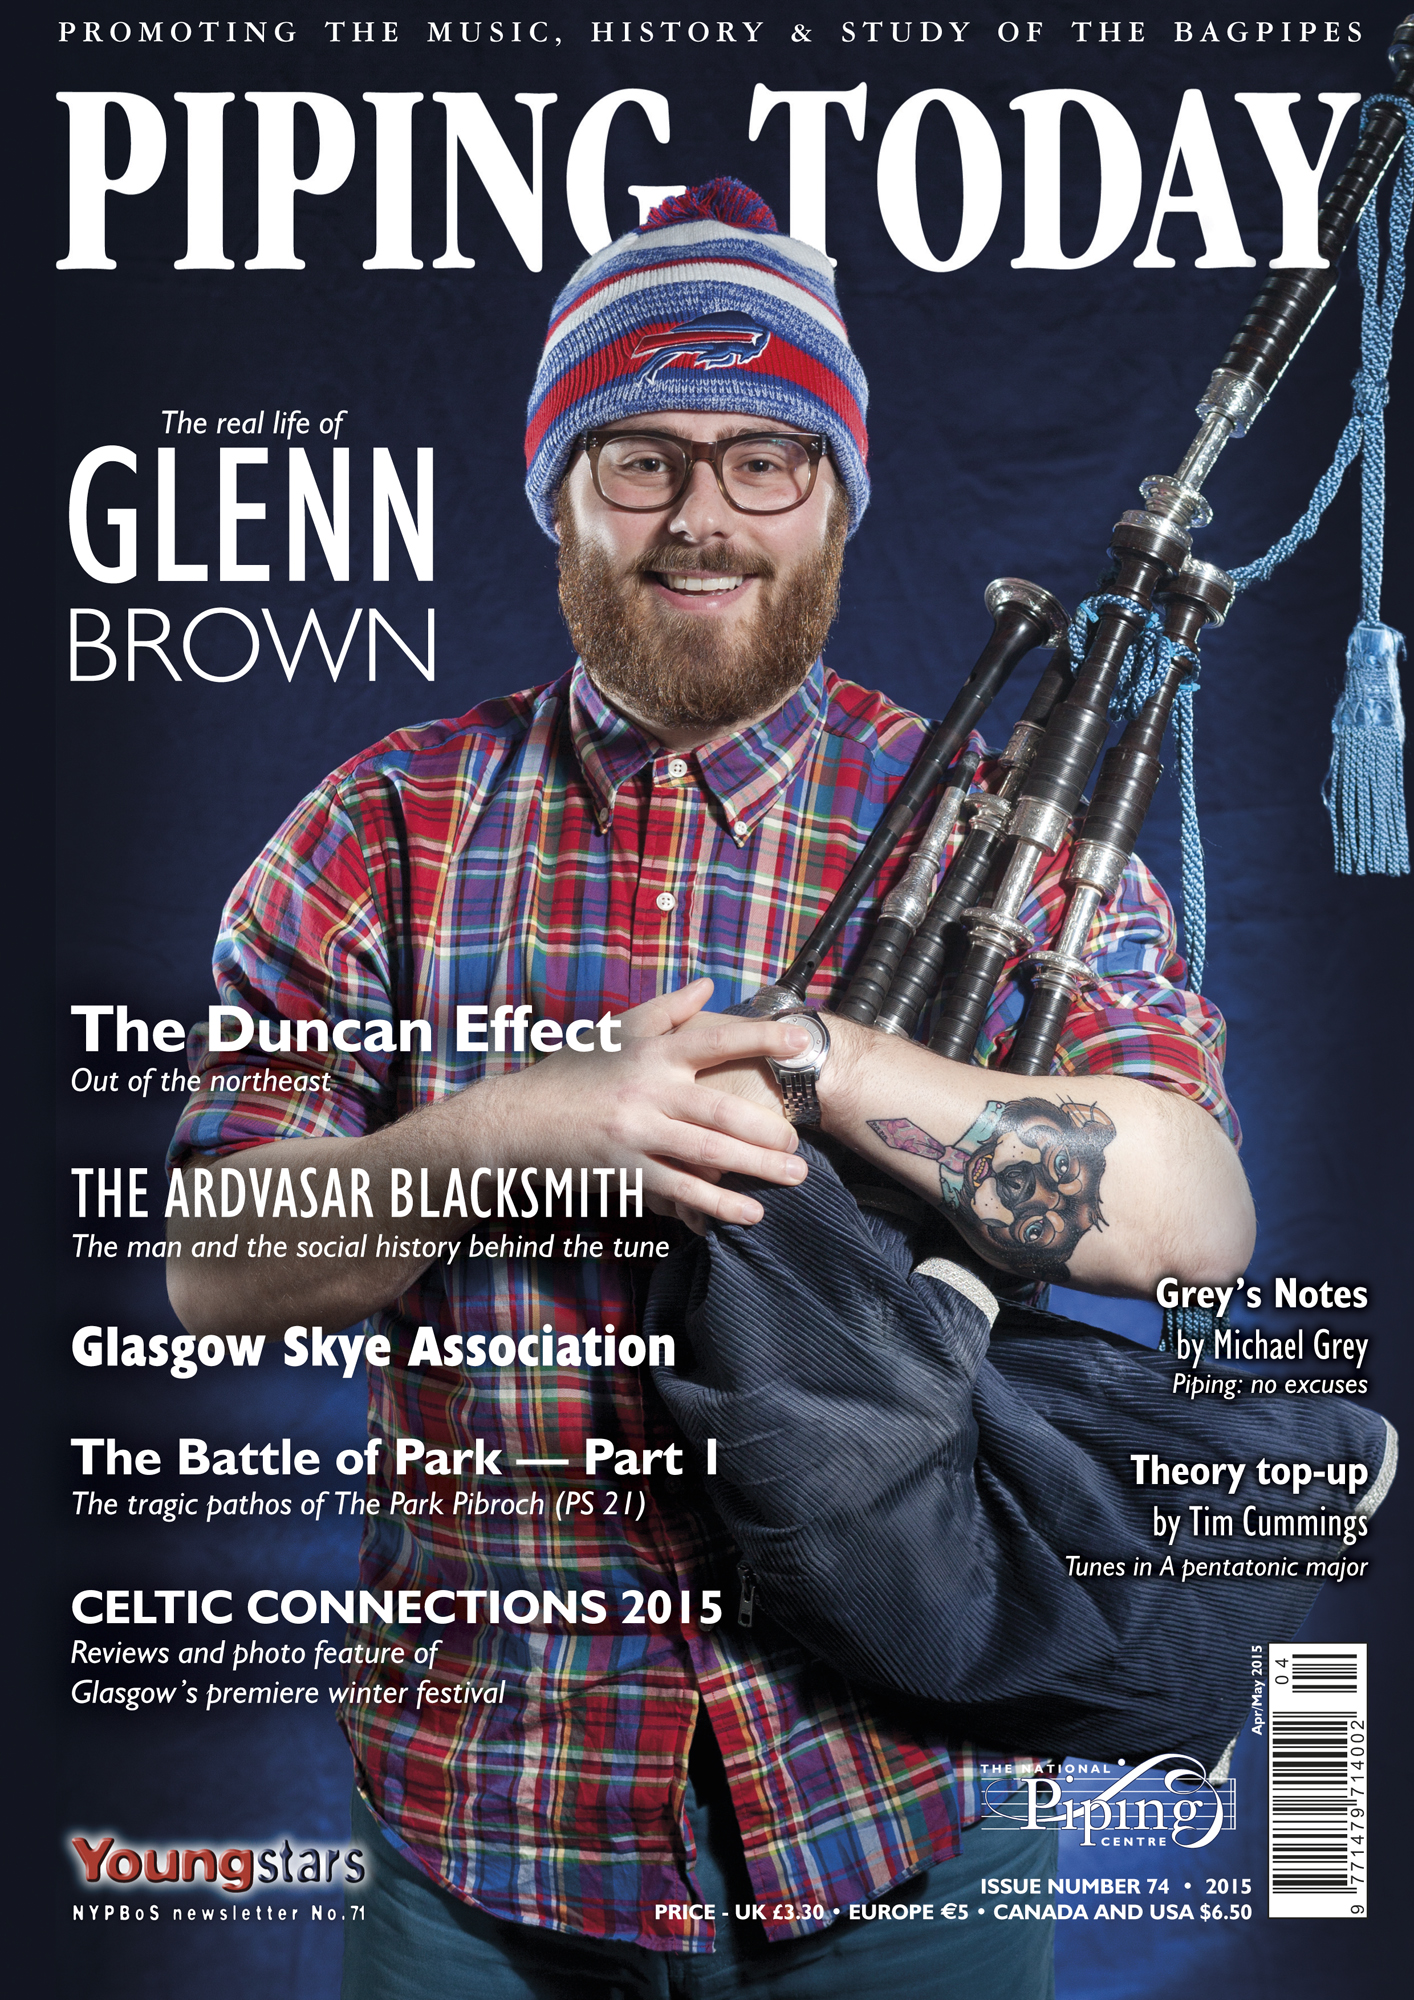 Piping Today magazine